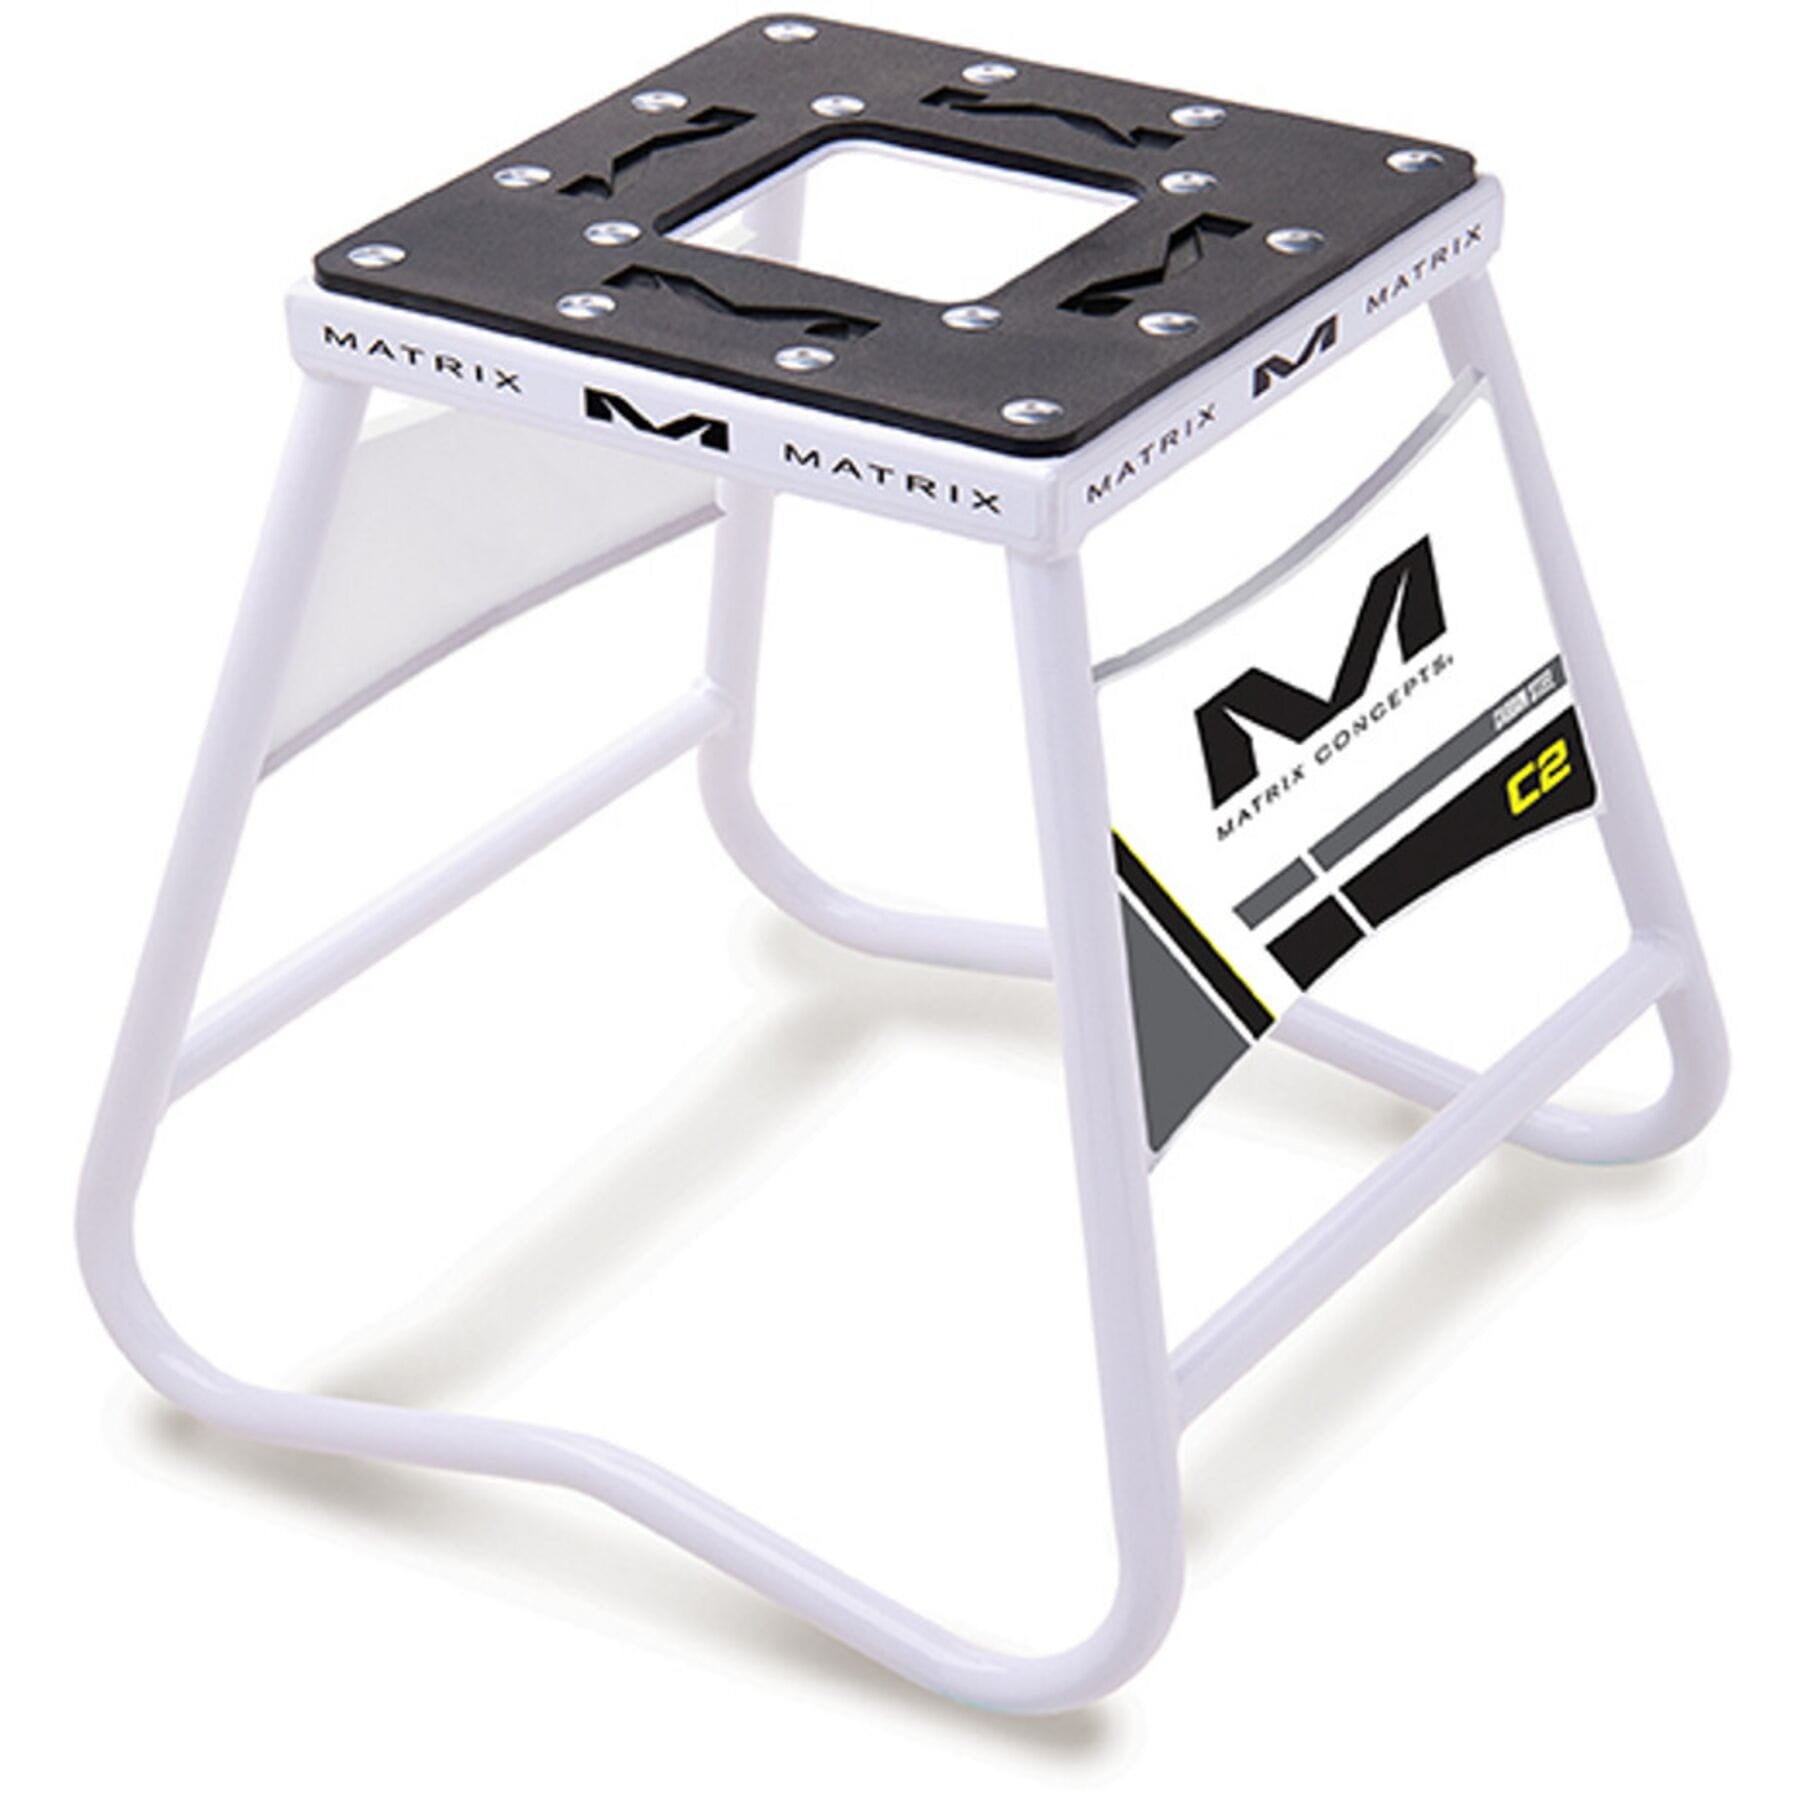 Matrix C2 Steel Stand with Sponsor boards White